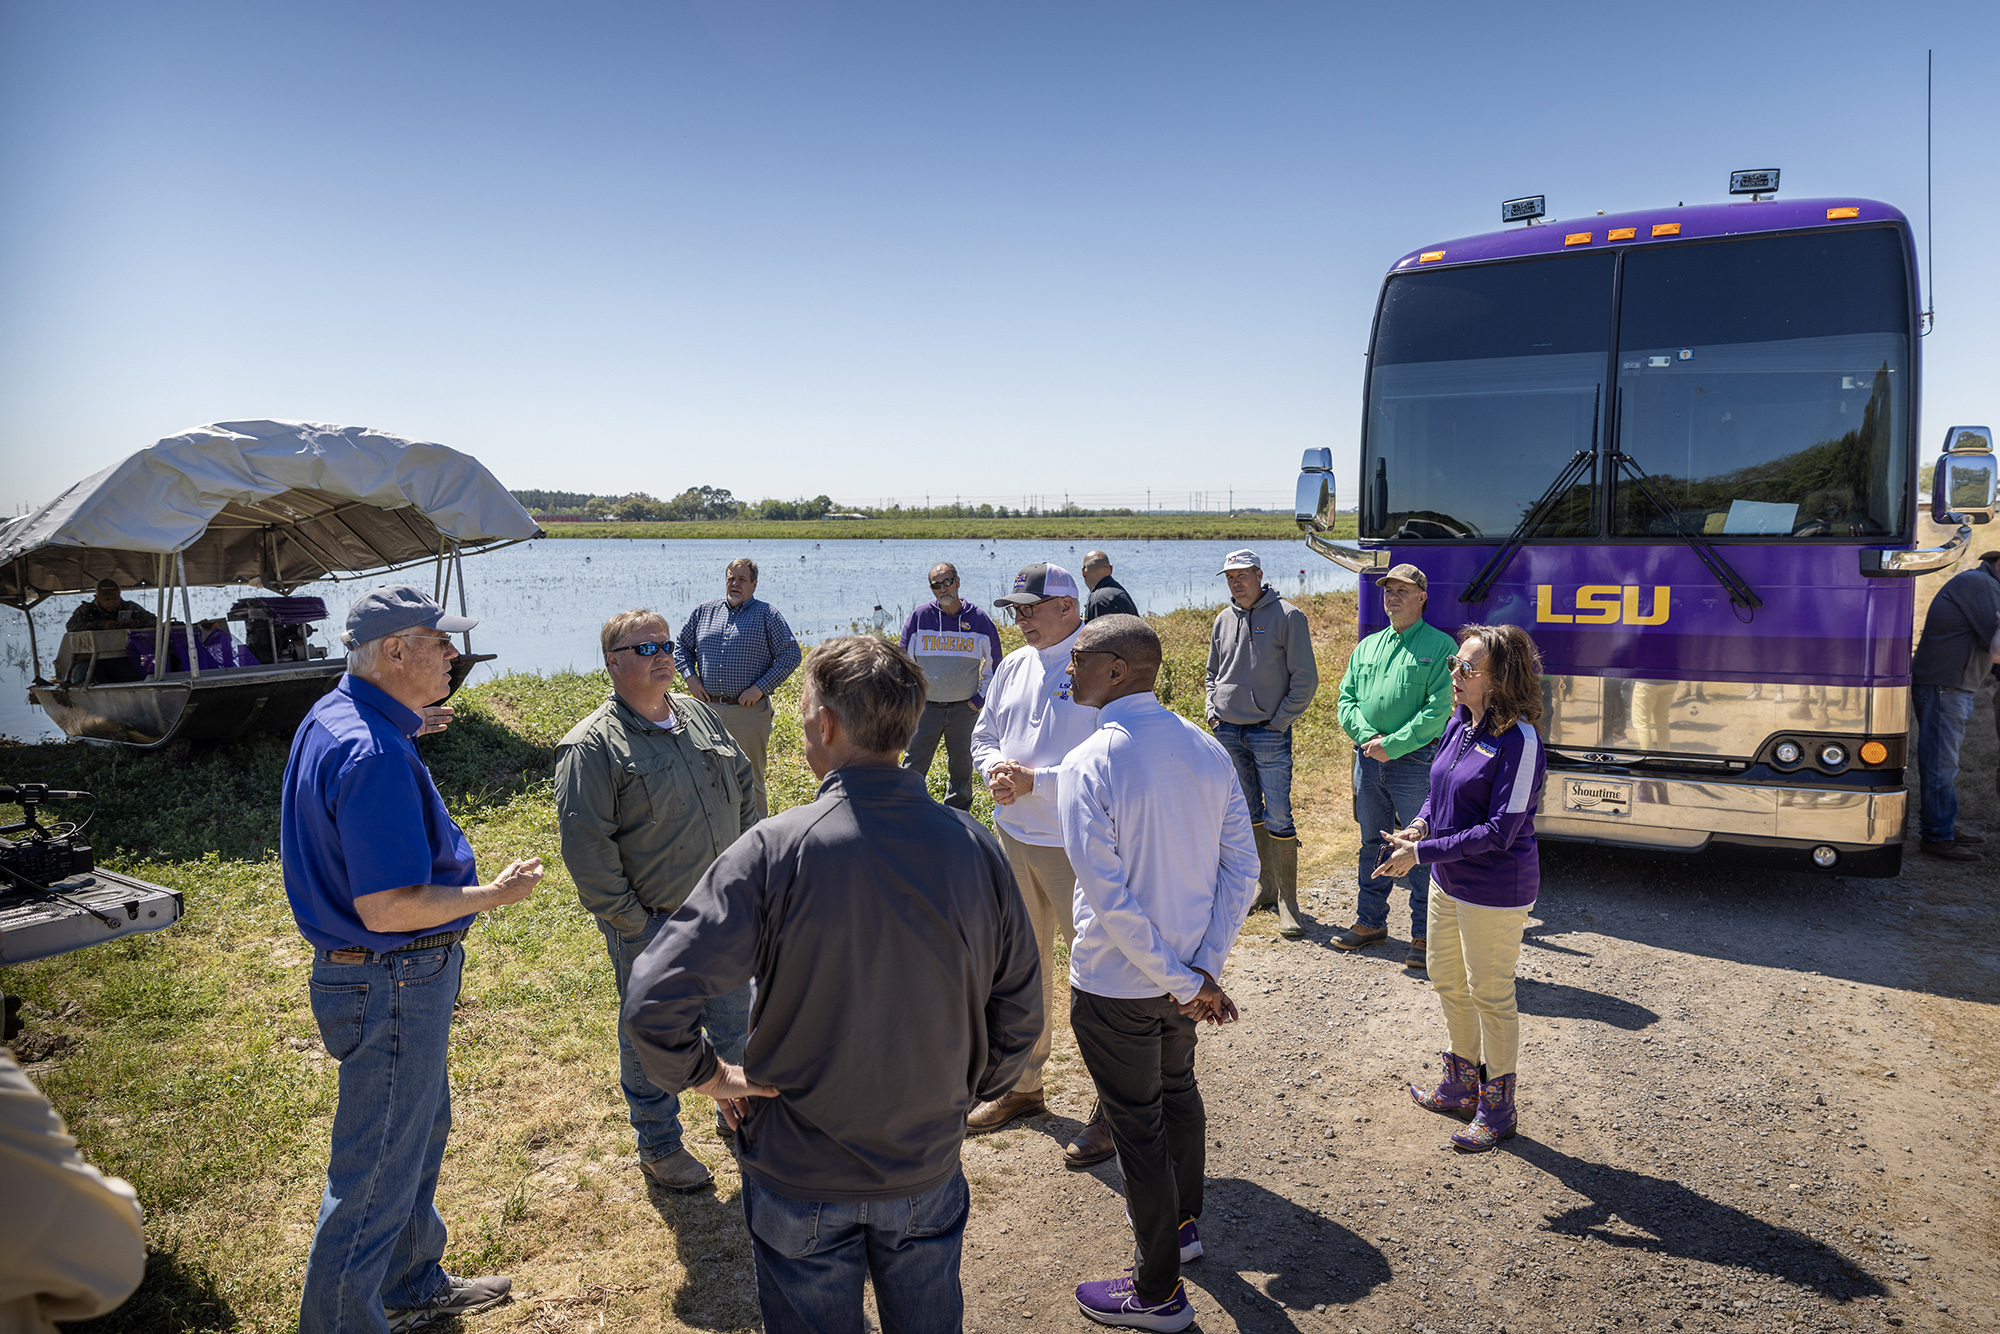  President Tate in conversation with group at crawfish pond with bus in background